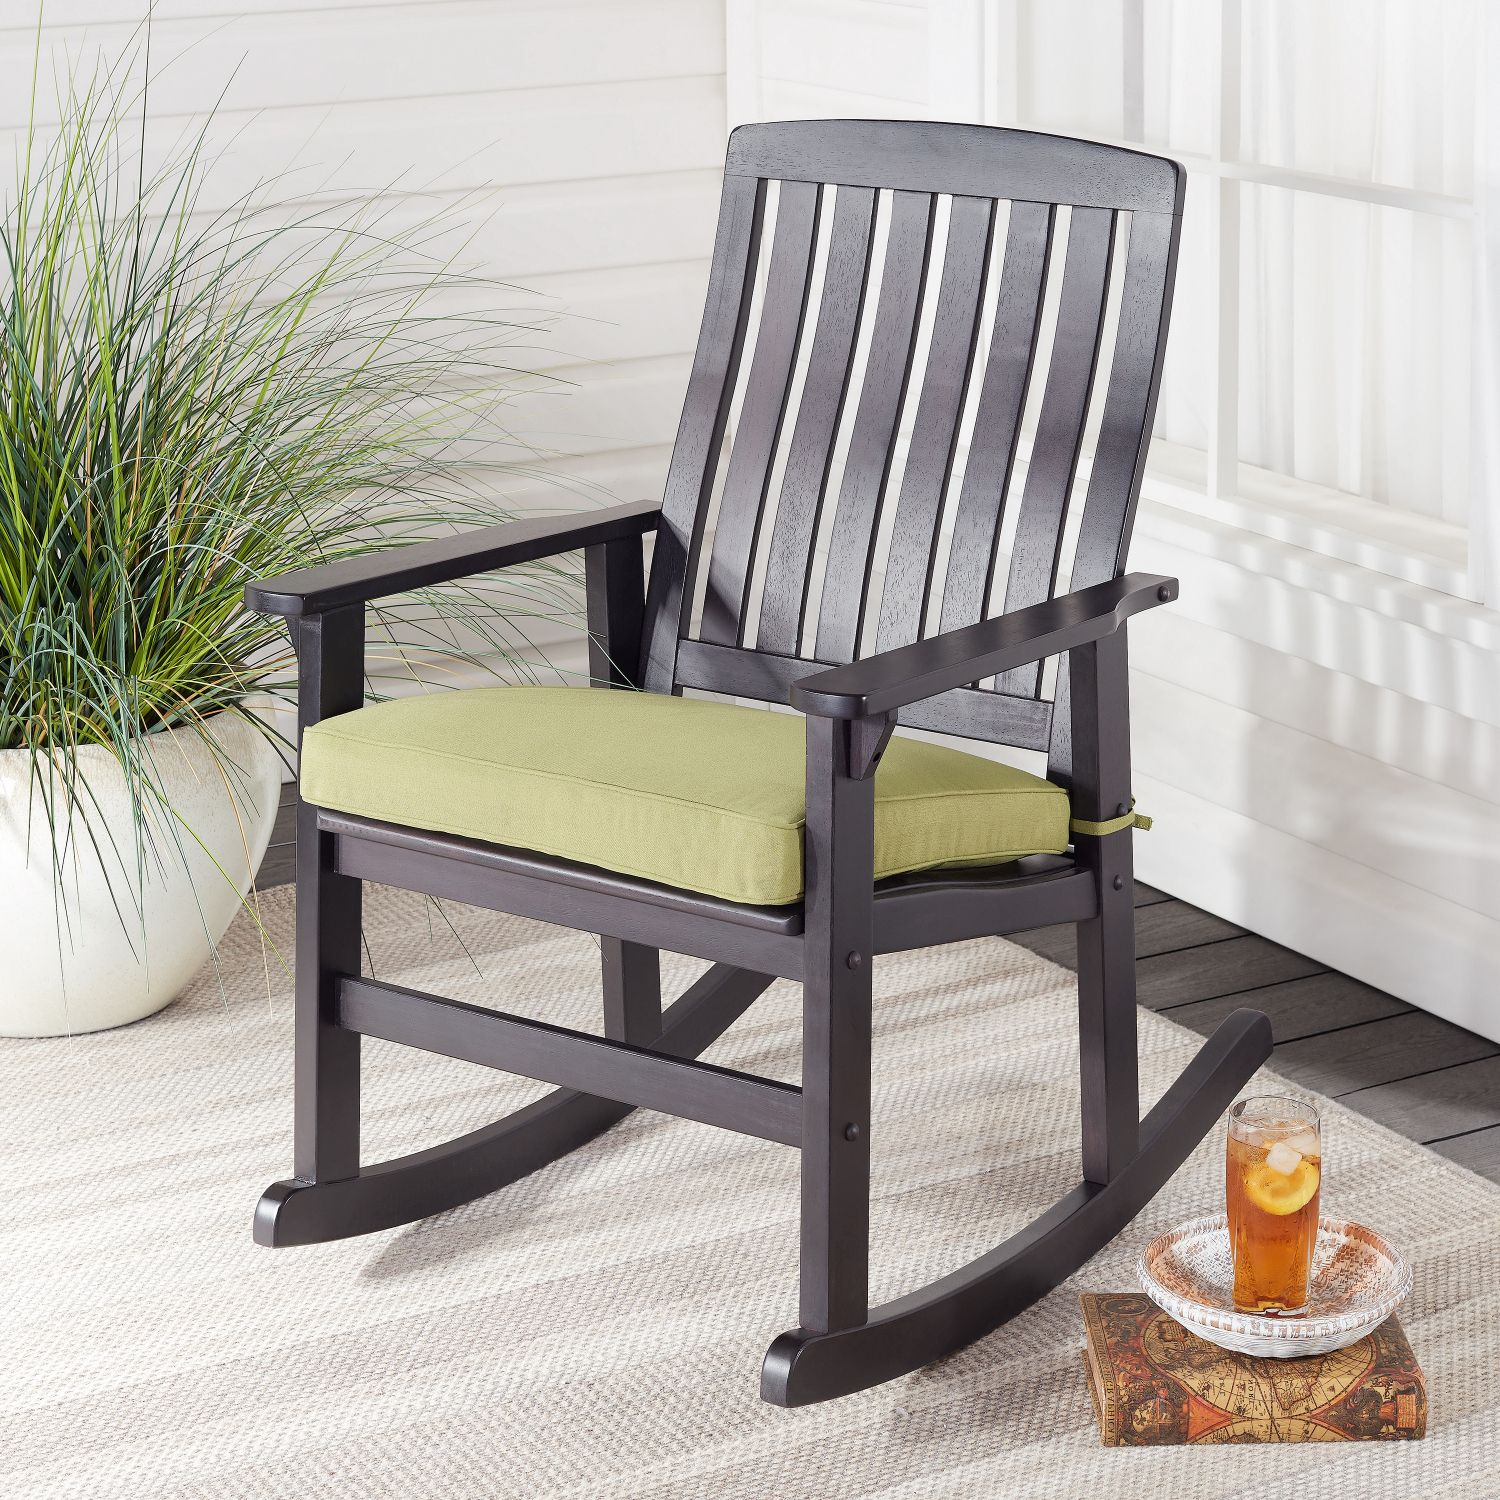 Most Popular Dark Wood Outdoor Chairs Regarding Wood Rocking Chair Durable Furniture Unit Dark Brown Framed Cushioned (View 5 of 15)